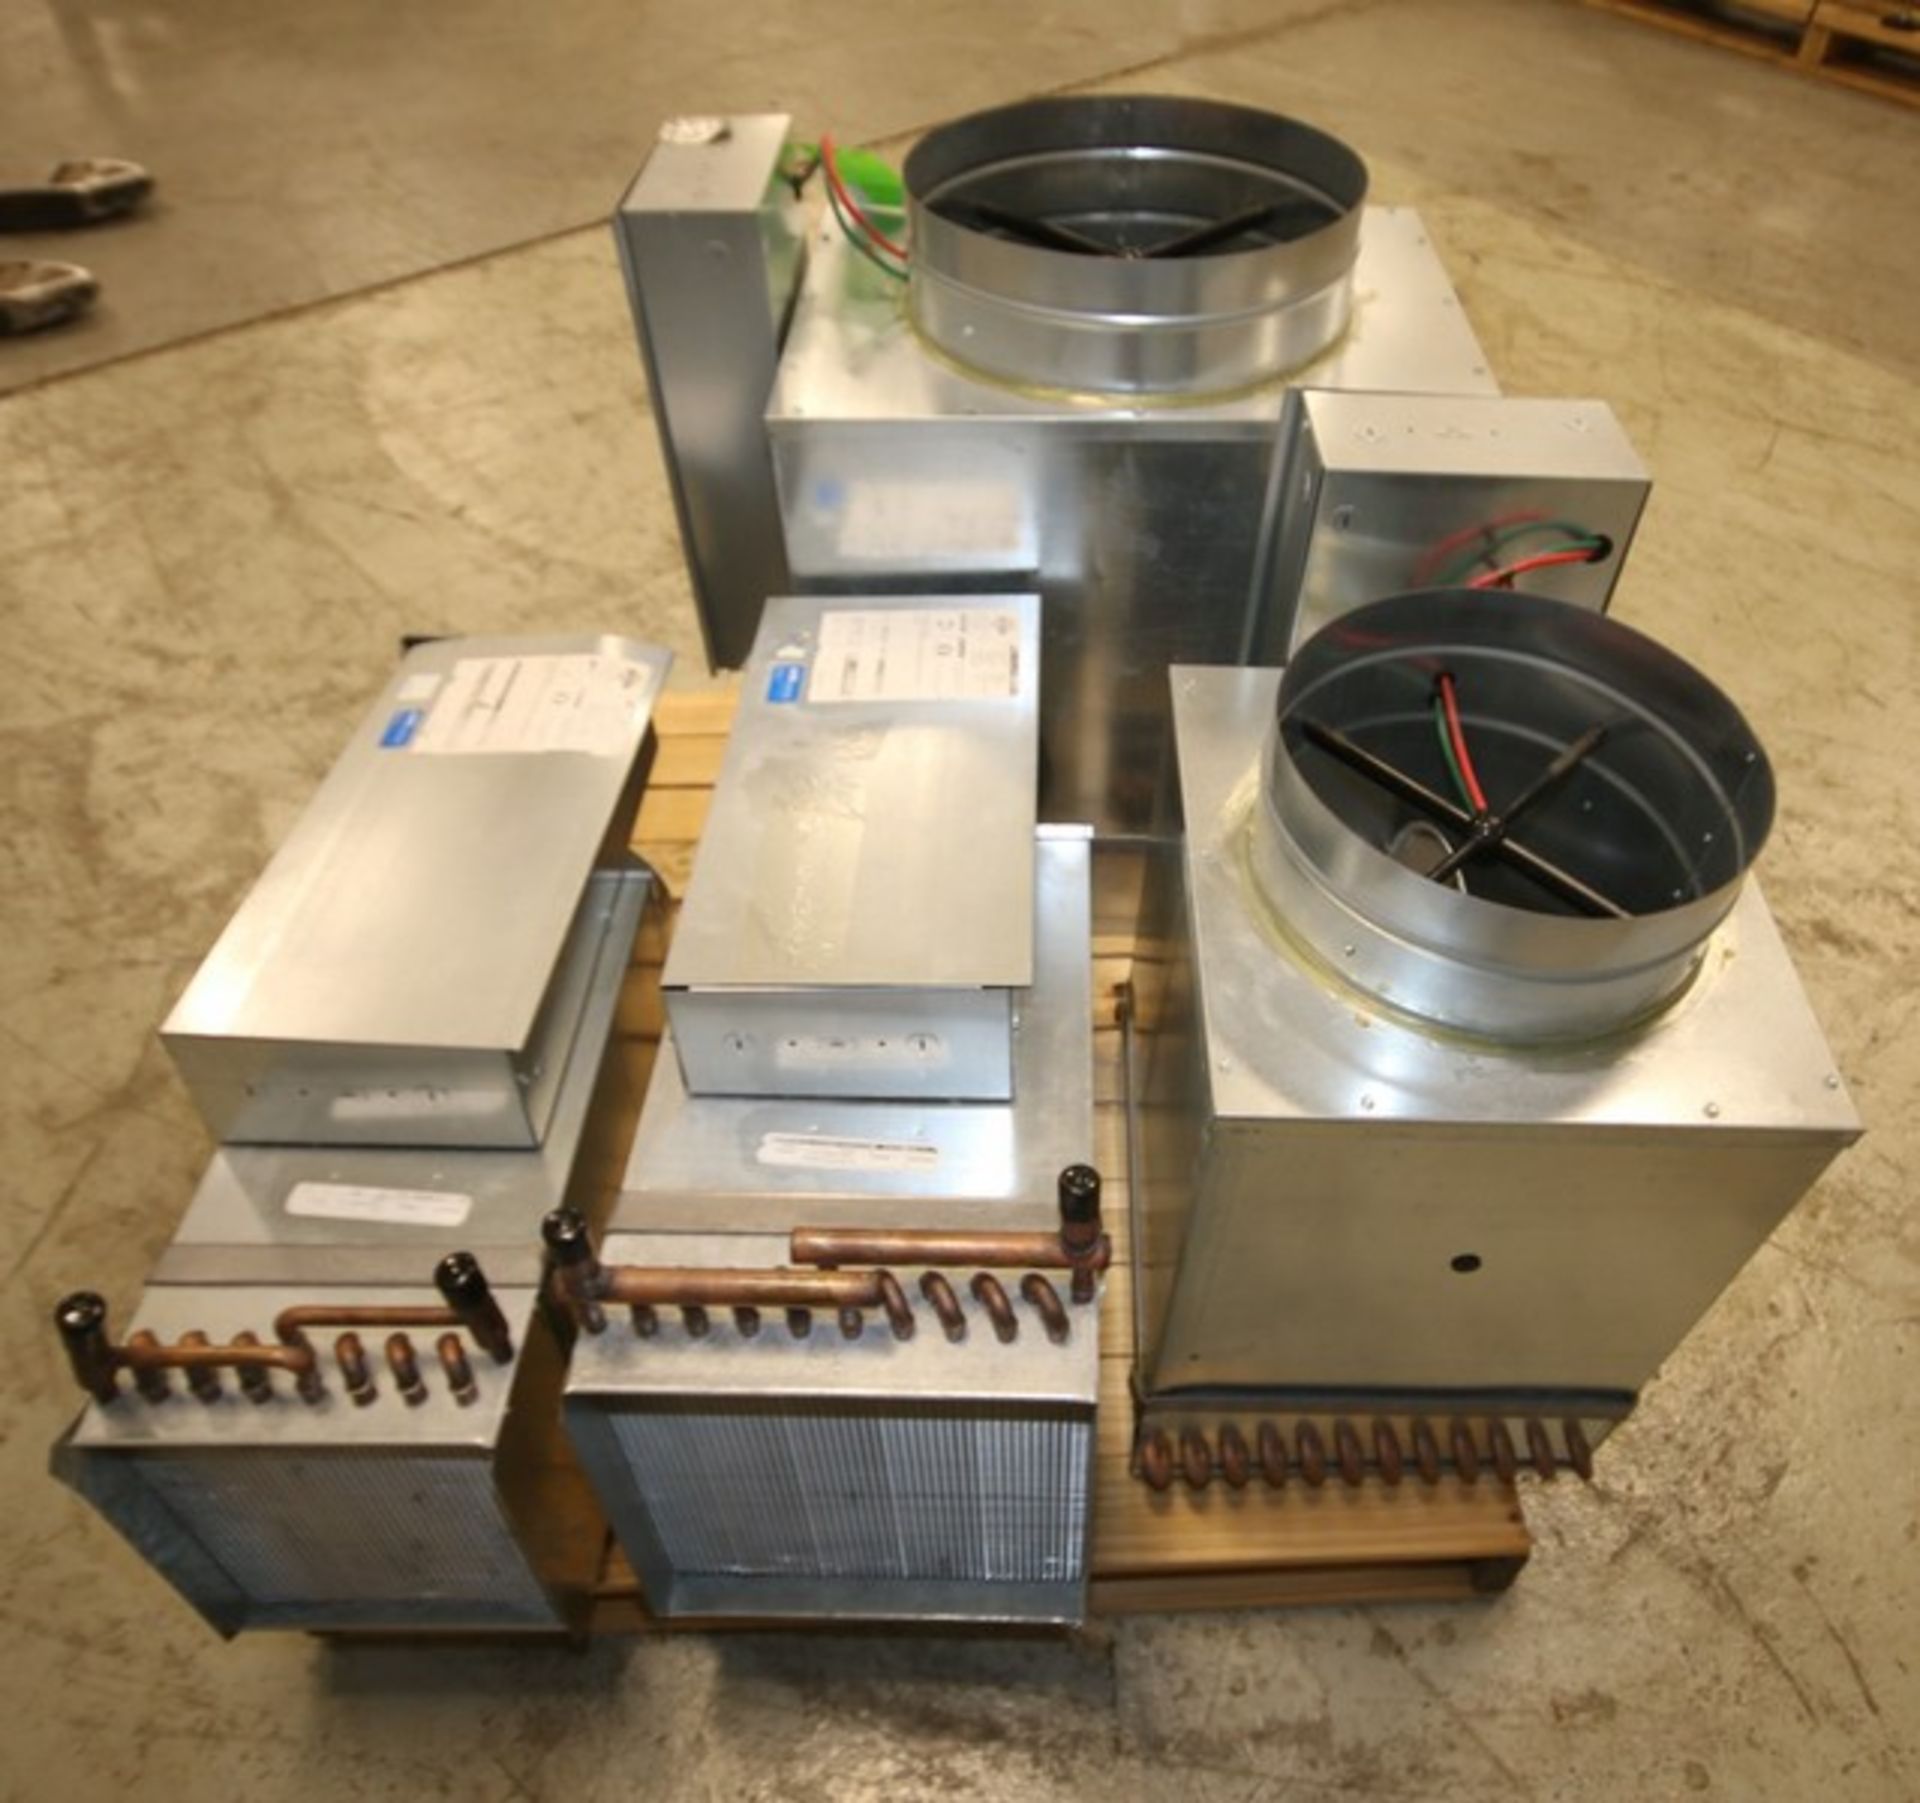 Lot of (4) Assorted Air Distribution / Price 16", 12", 8" & 10" Evaporator Coils, Order #560899, - Image 3 of 7